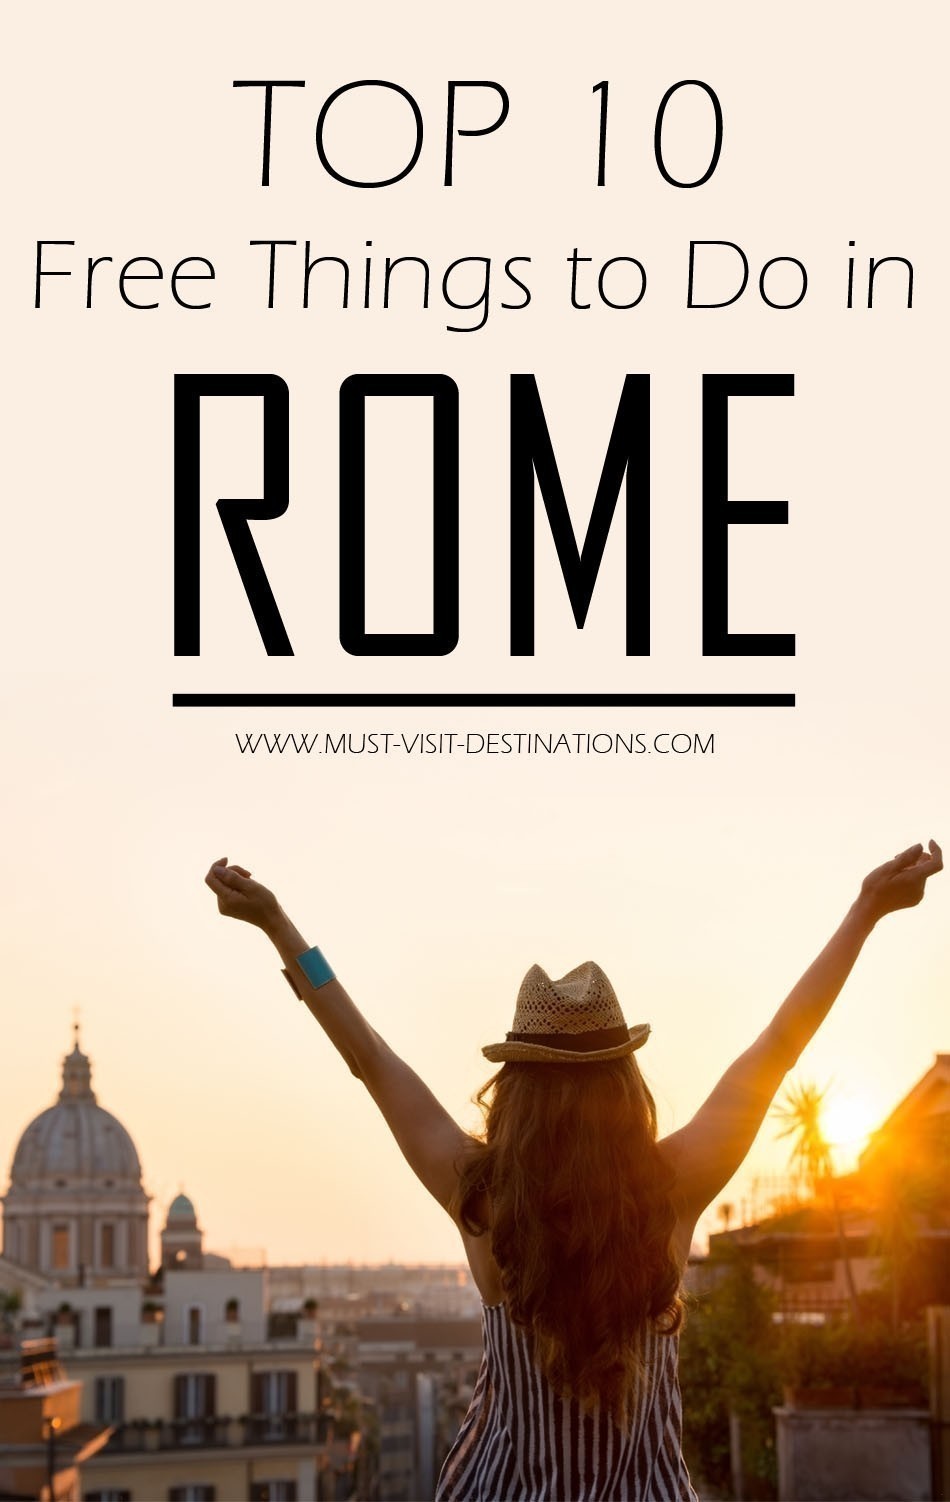 Here is a list of TOP 10 free things to do in ROME to encourage you to pay a visit to and examine this historical urban center!